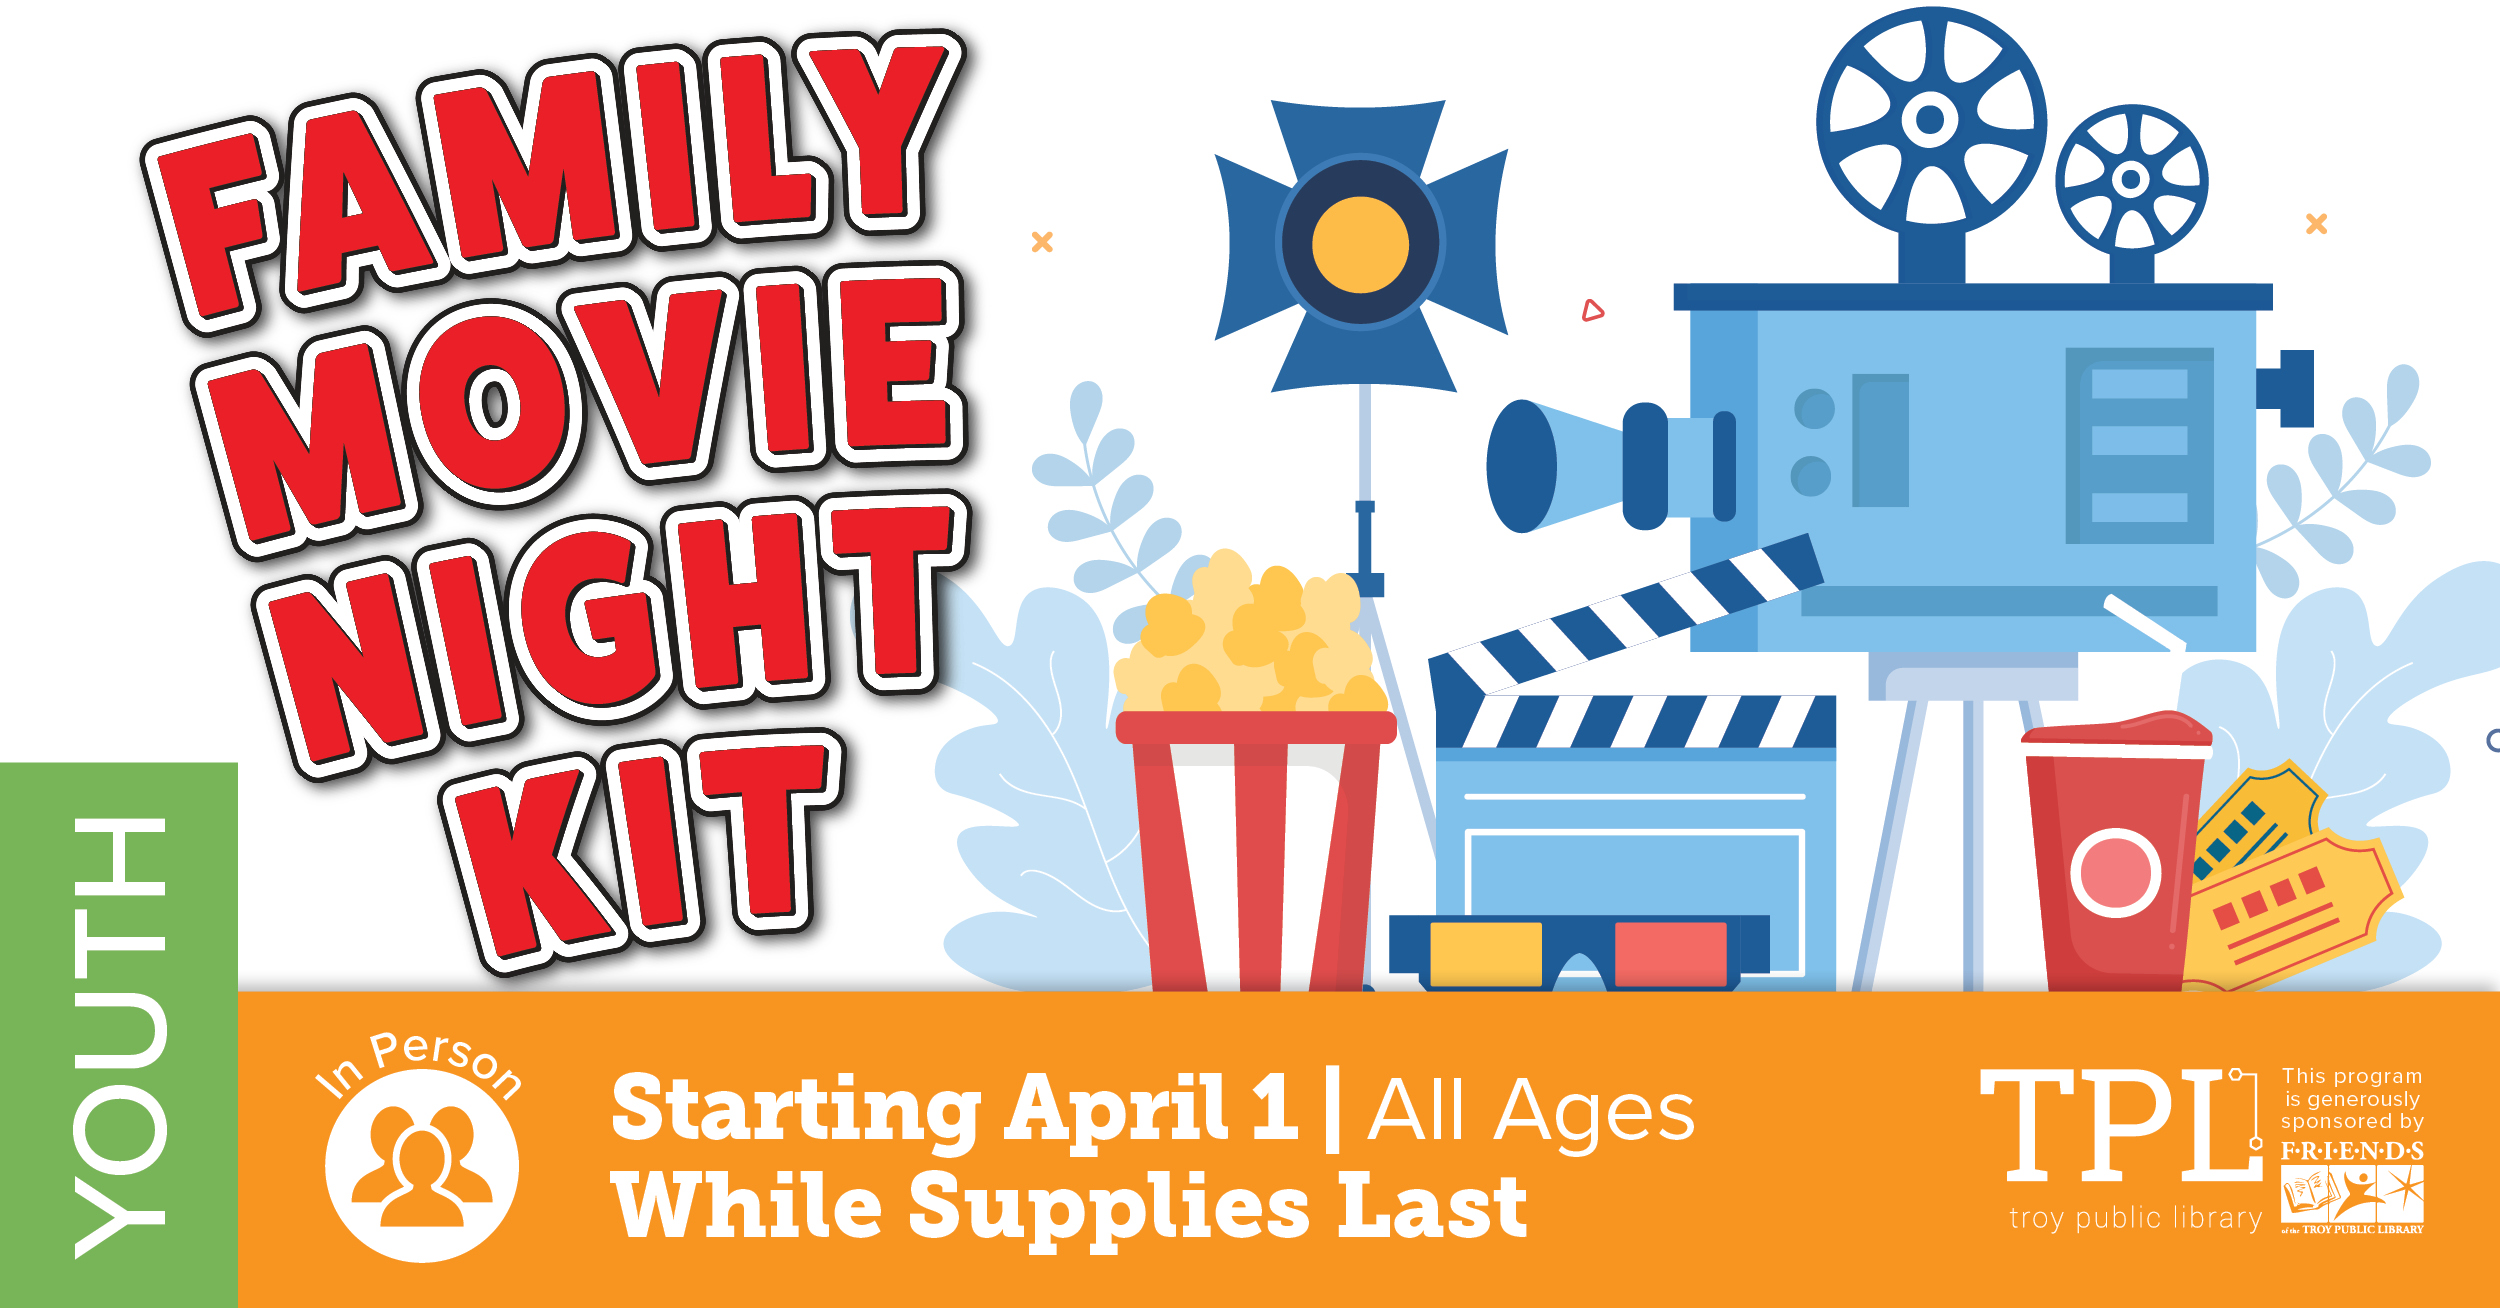 Family Movie Night Kit. Starting April 1, while supplies last. All ages. 1 kit per family. Sponsored by the Friends of the Troy Public Library. 